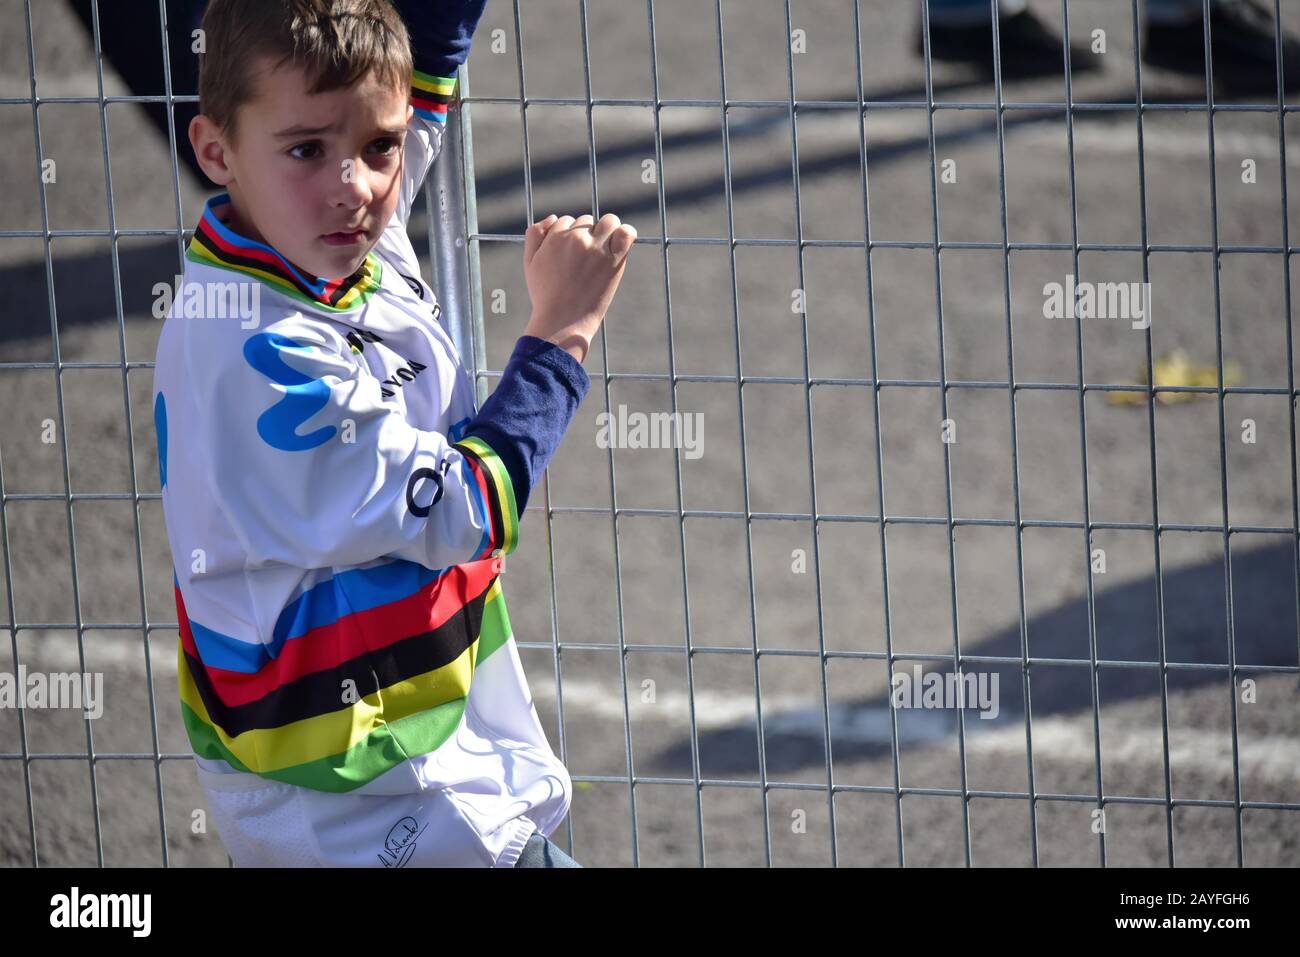 Young cycling fan wearing Alexandre Valverde's rainbow jersey waits for his hero Stock Photo